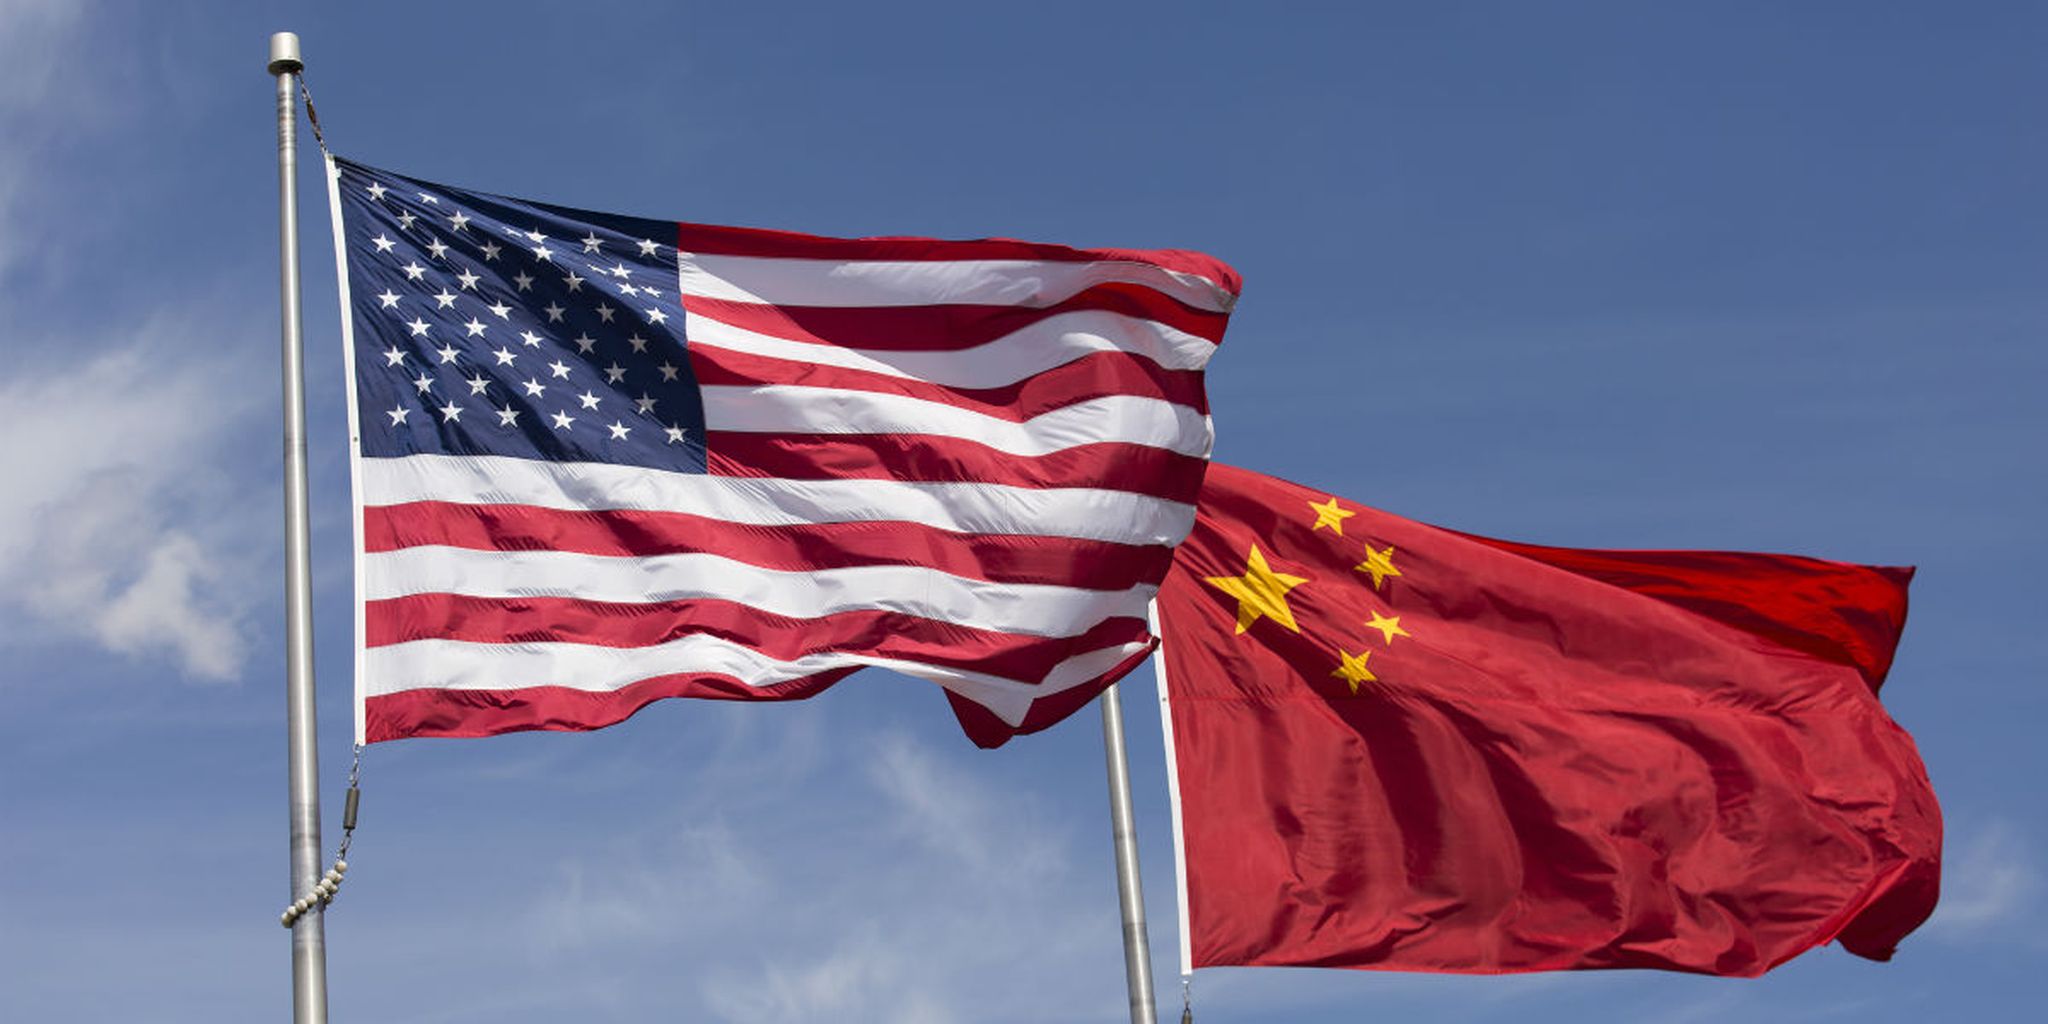 Negative effects of tensions between China and the US